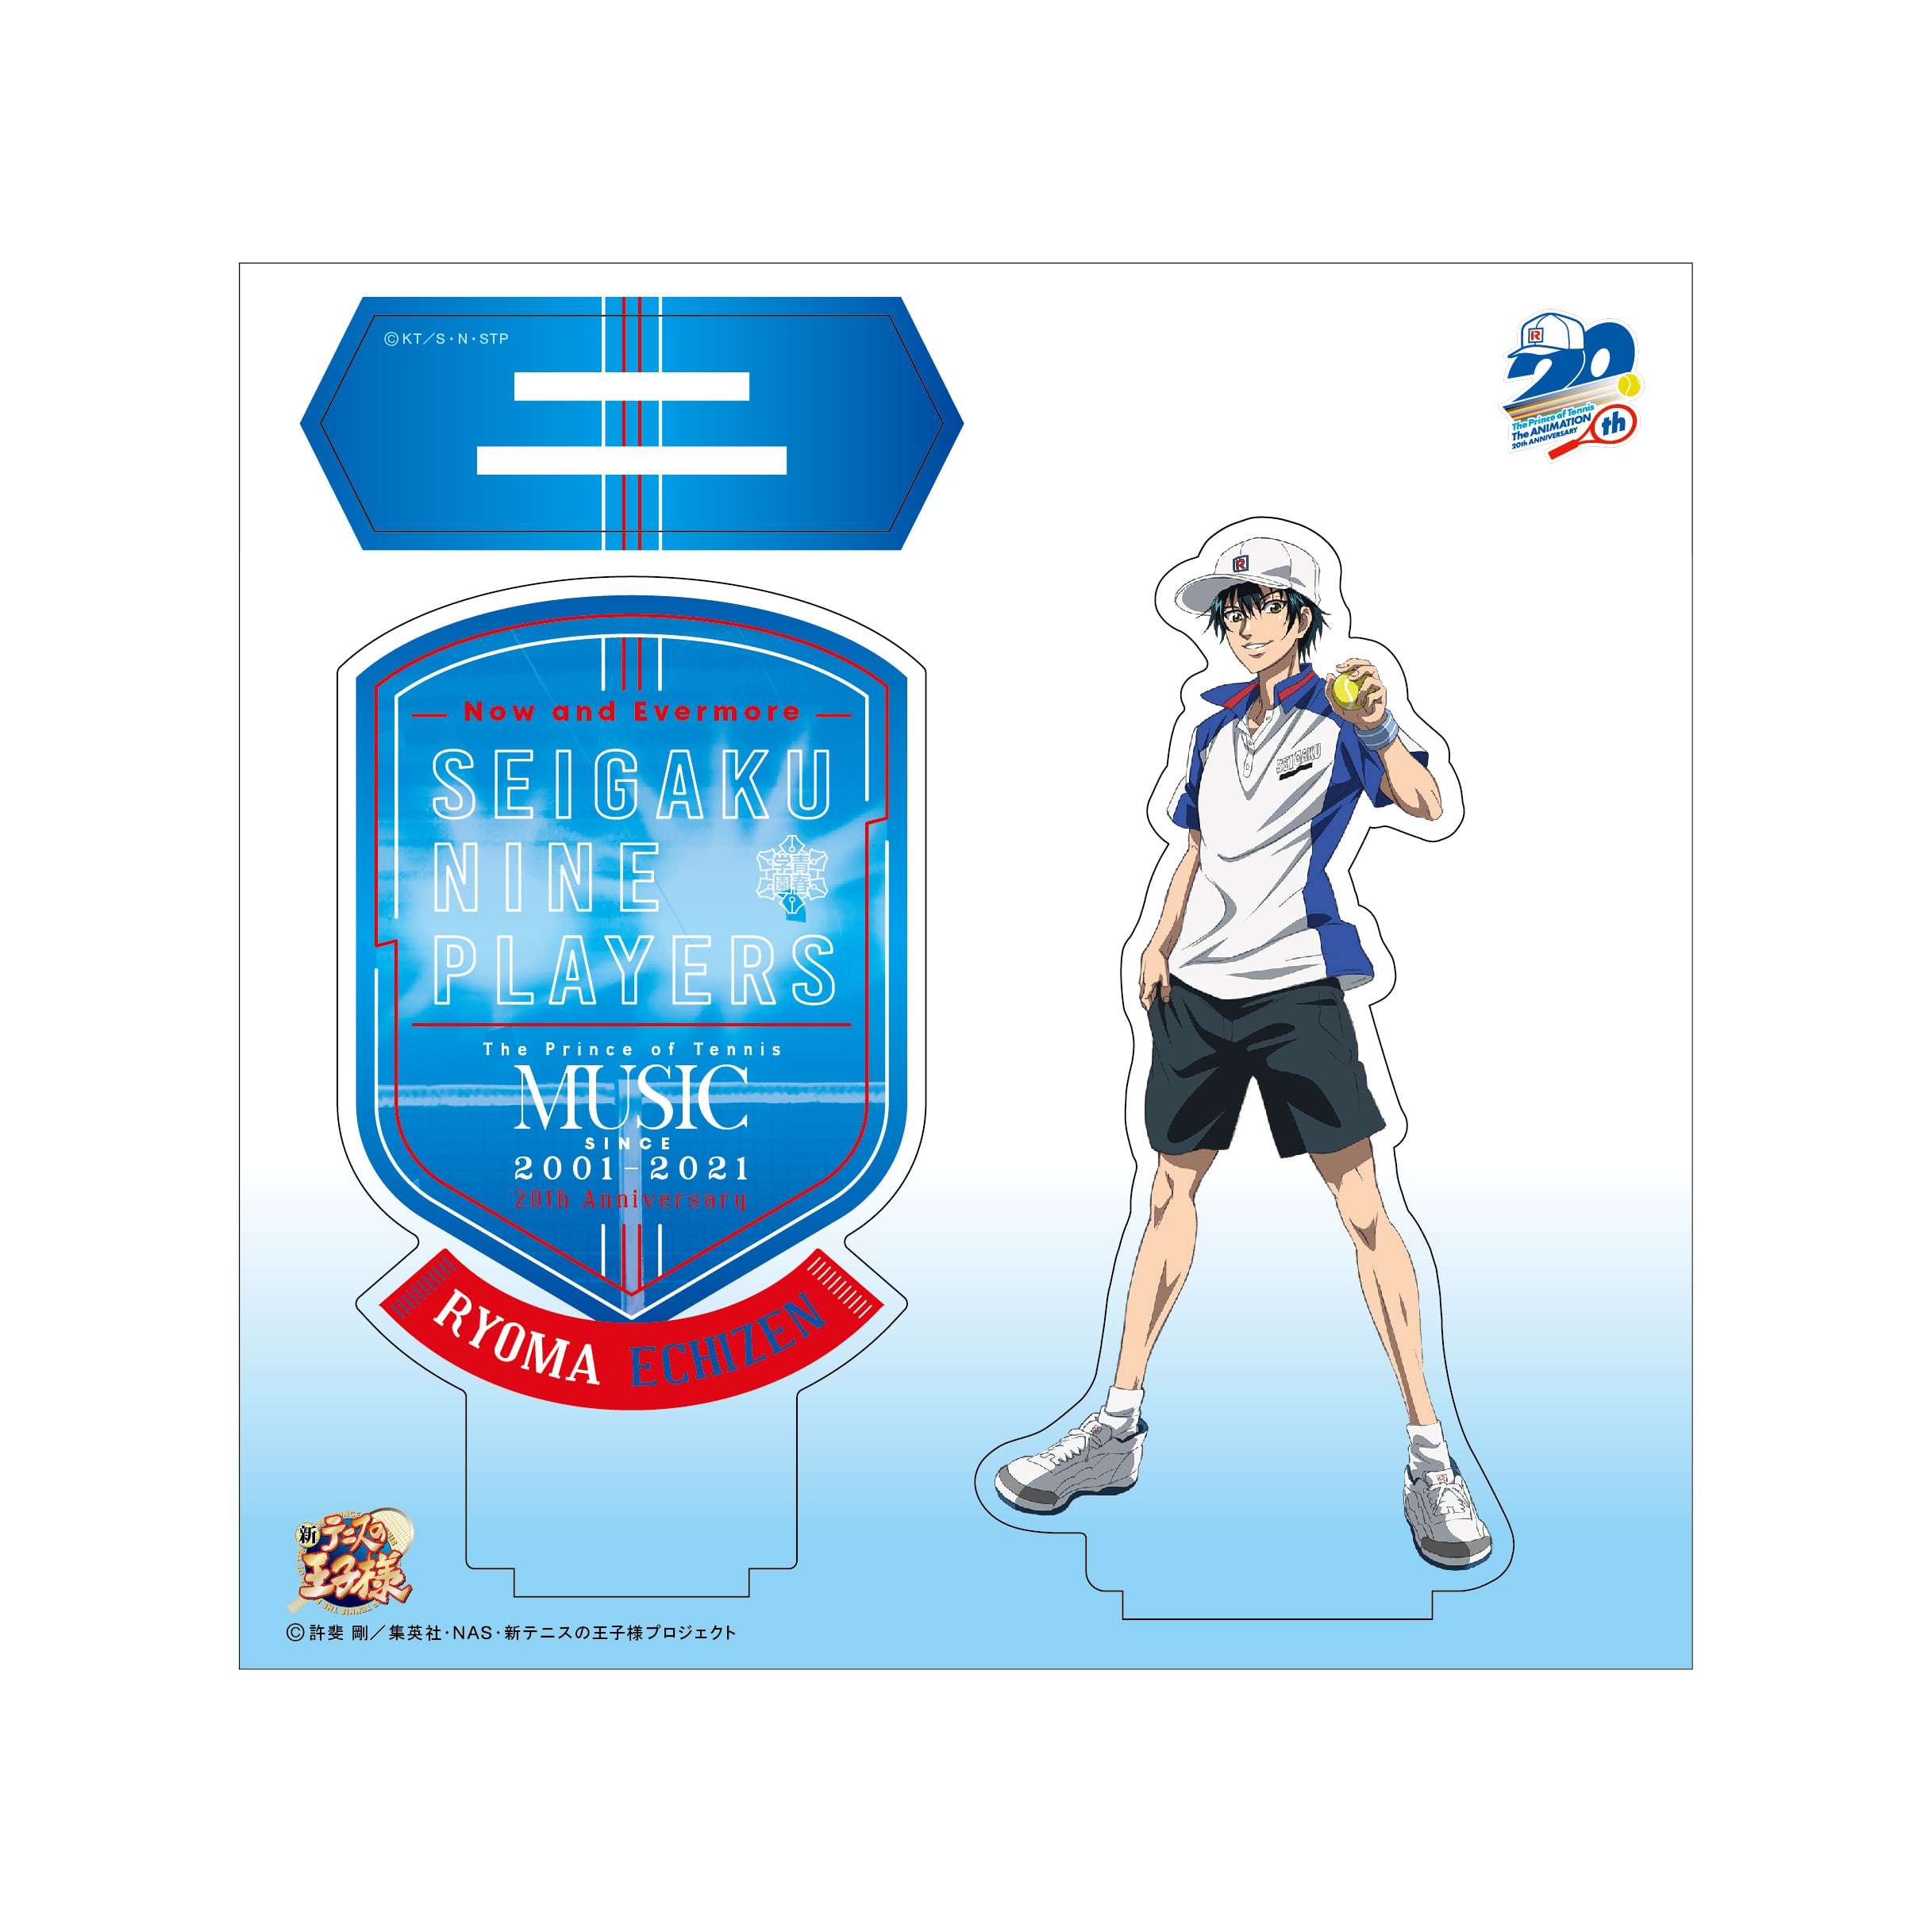 SEIGAKU NINE PLAYERS「Now and Evermore」キャラクターアクリル